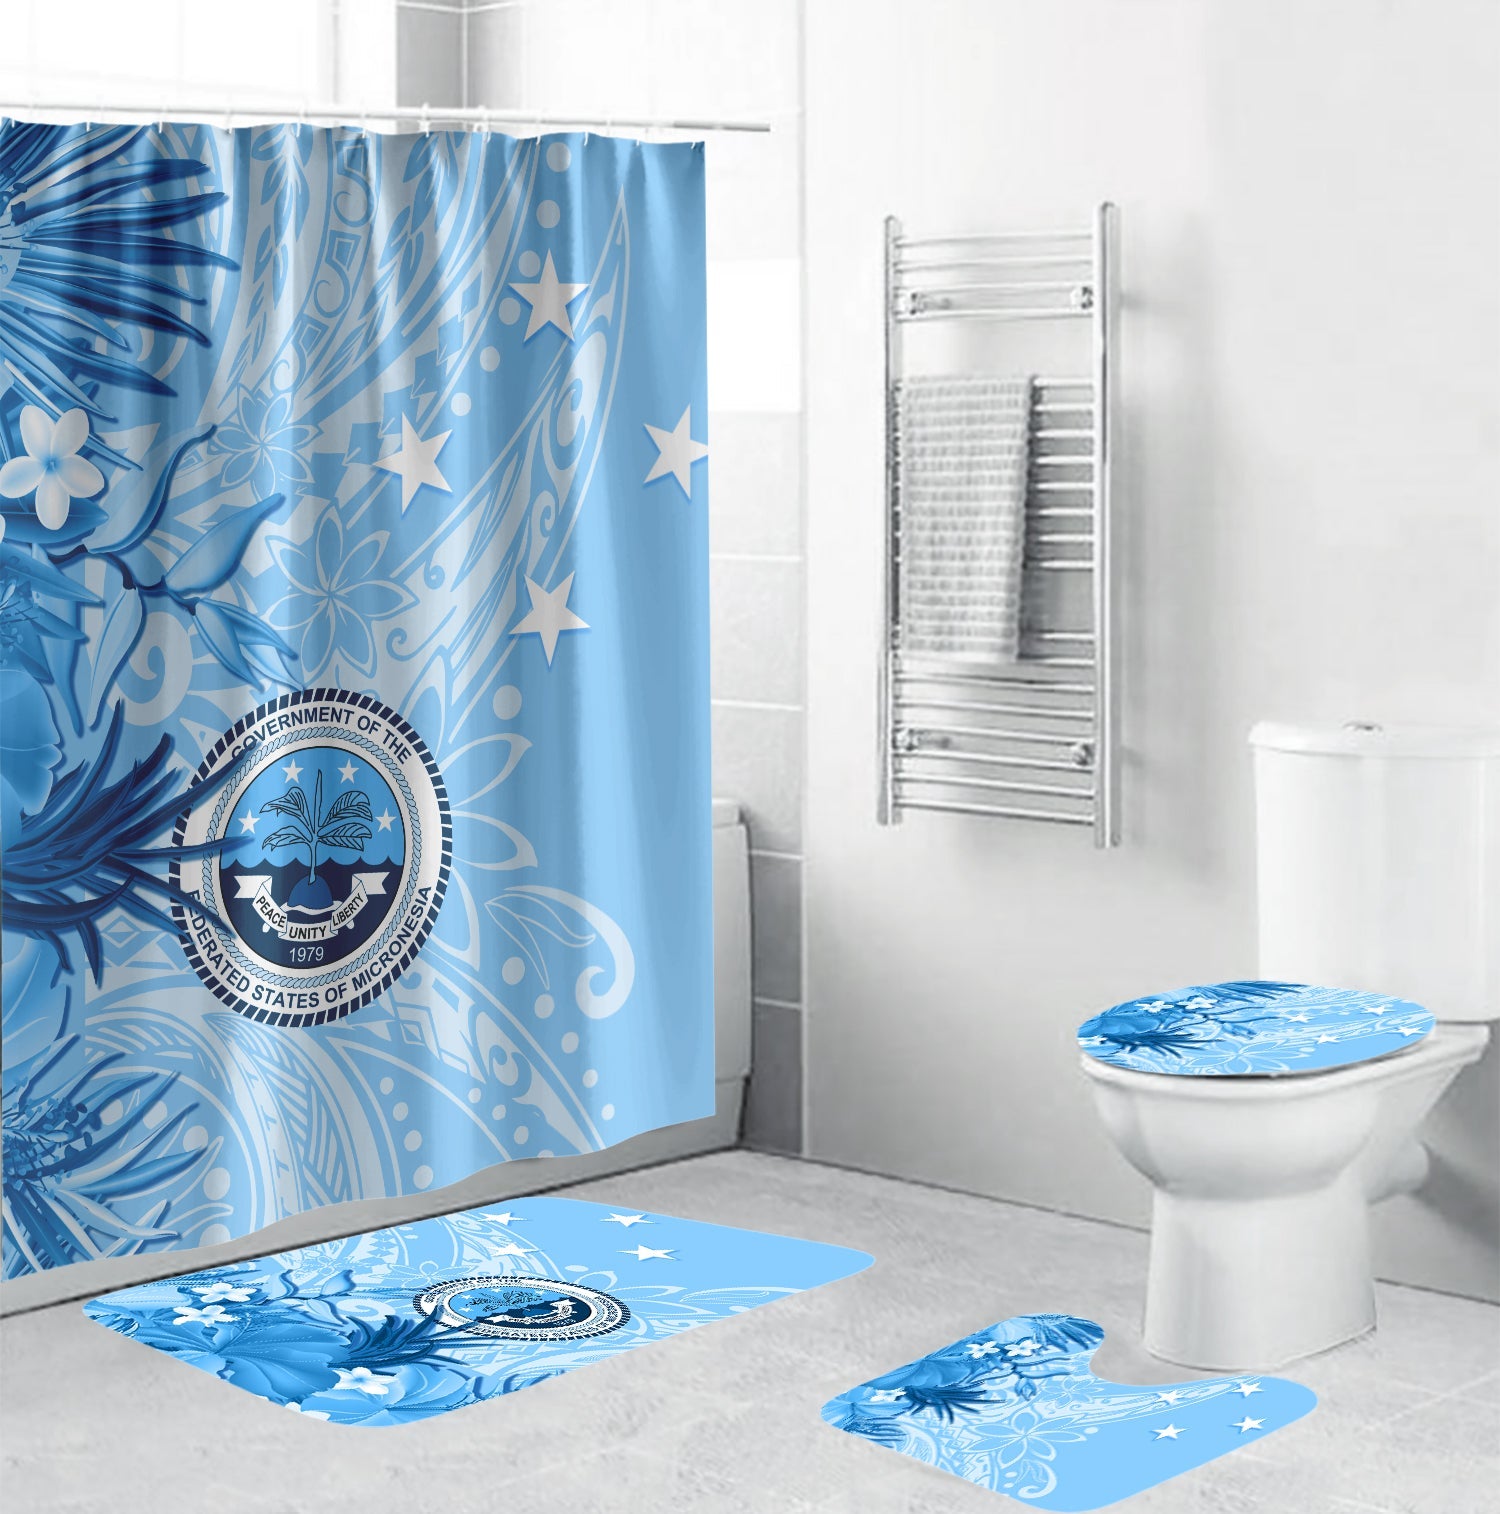 Federated States of Micronesia Bathroom Set Tropical Flowers LT7 Turquoise - Polynesian Pride